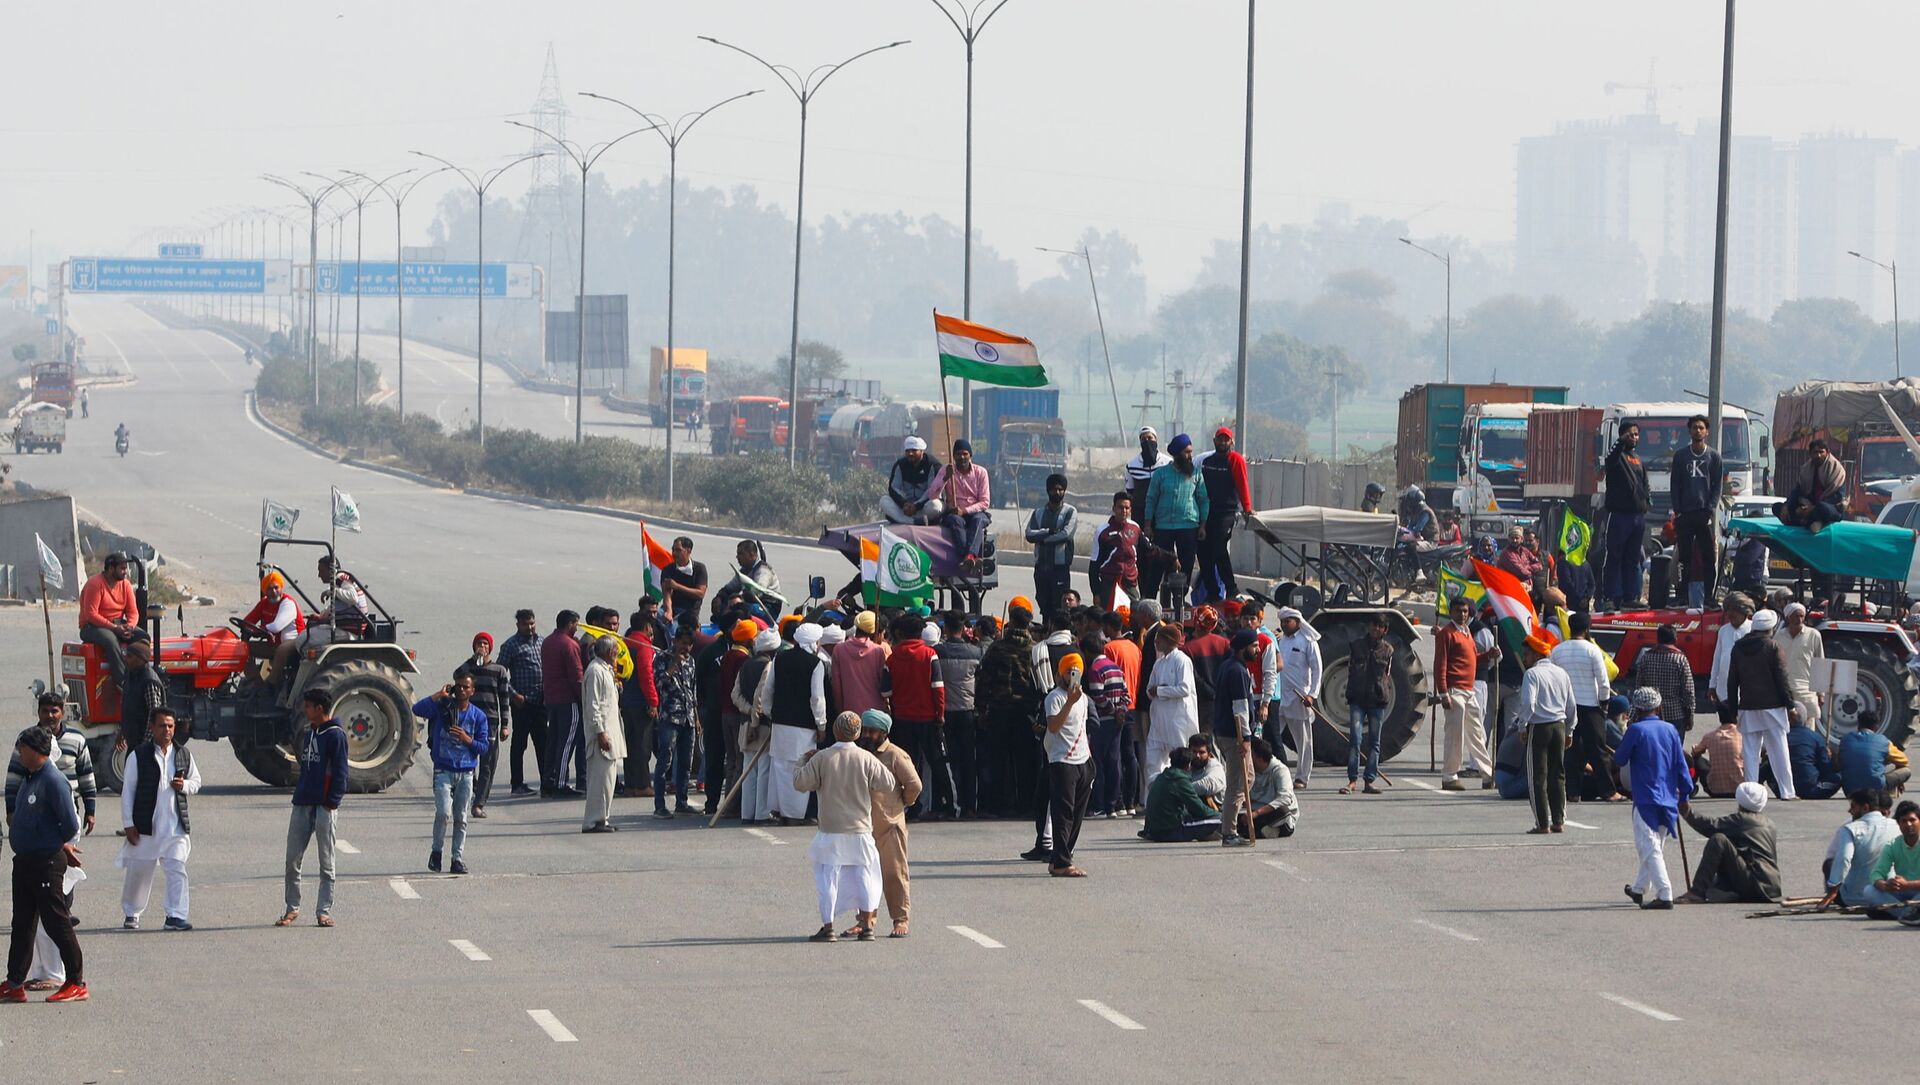 Farmers take part in a three-hour chakka jam or road blockade, as part of protests against farm laws on a highway on the outskirts of New Delhi, India, February 6, 2021. REUTERS/Adnan Abidi - Sputnik International, 1920, 06.02.2021